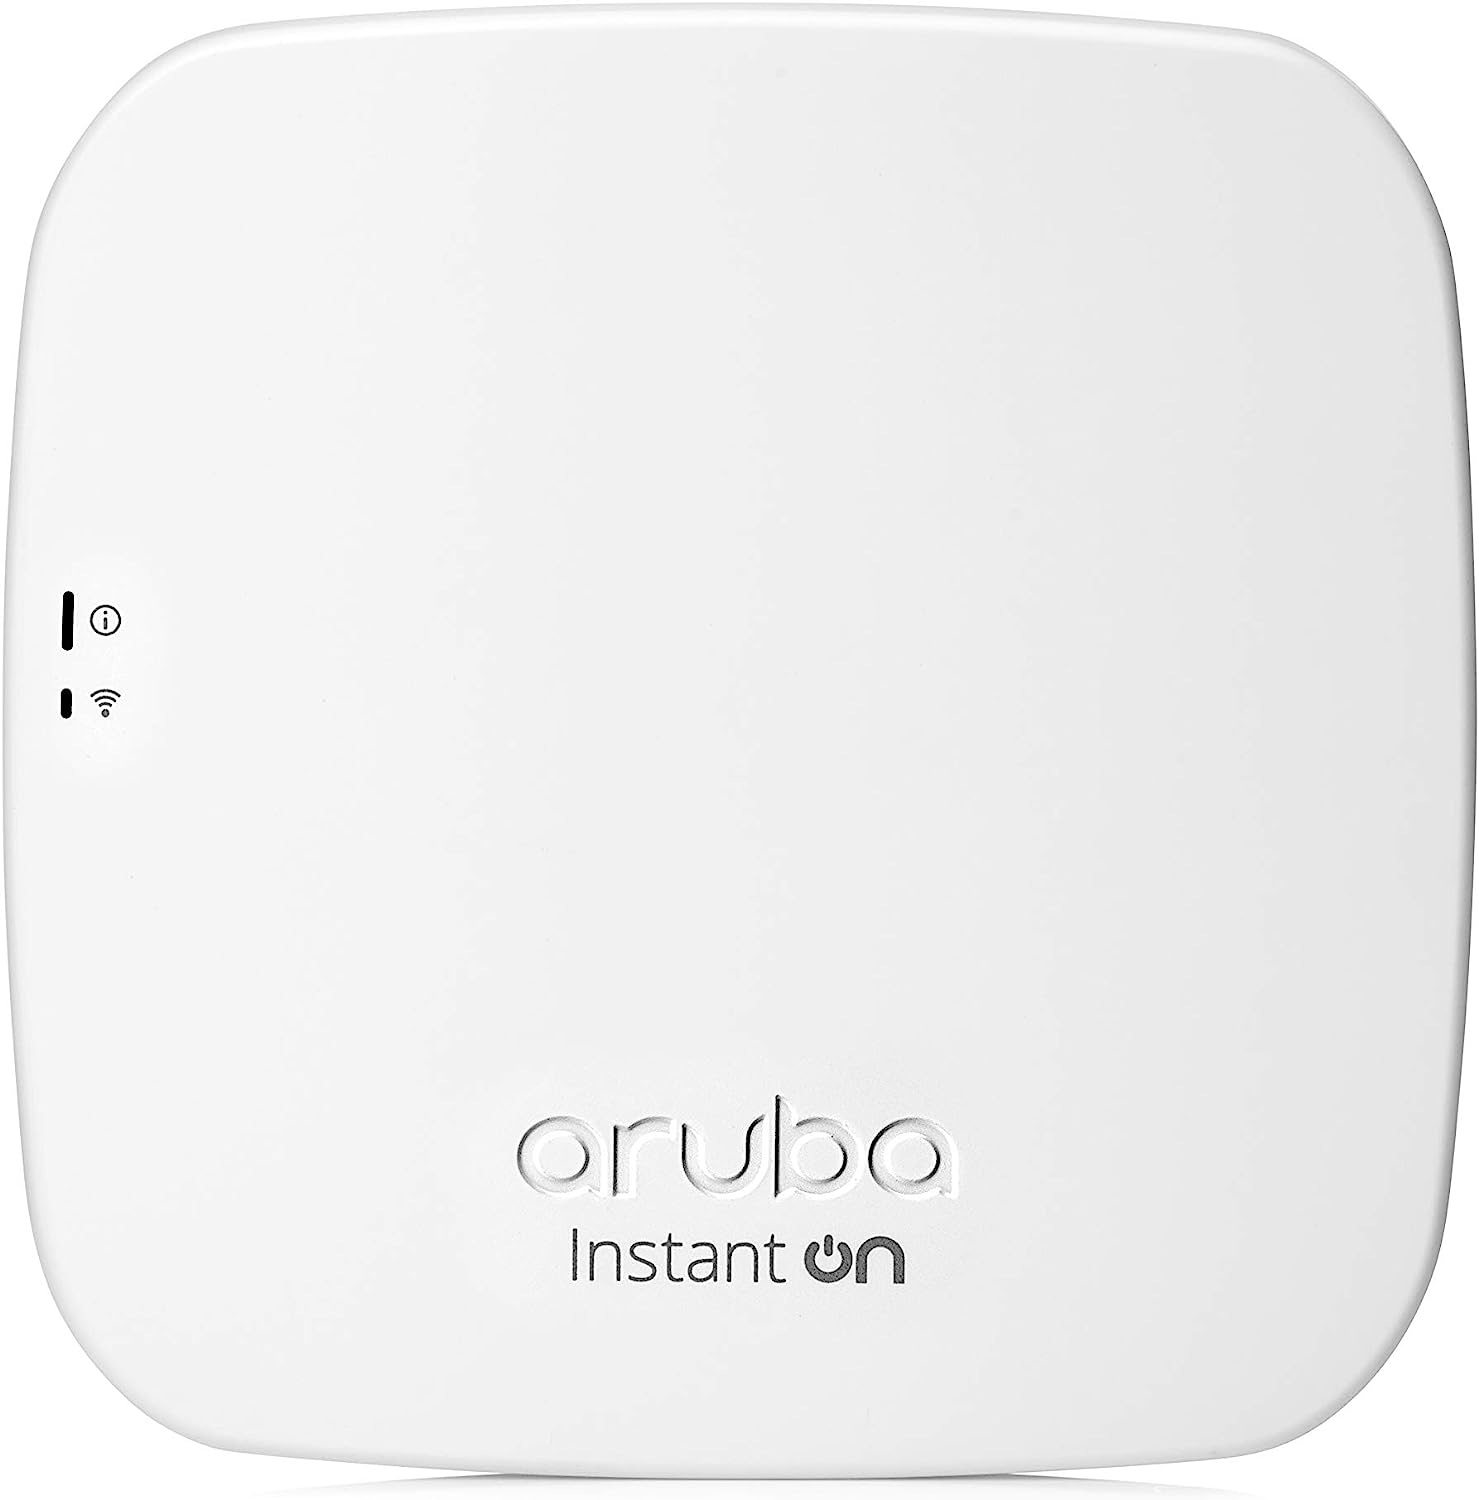 Aruba Instant On AP12 (R2X01A) 3x3 11ac Wave2 Indoor Access Point